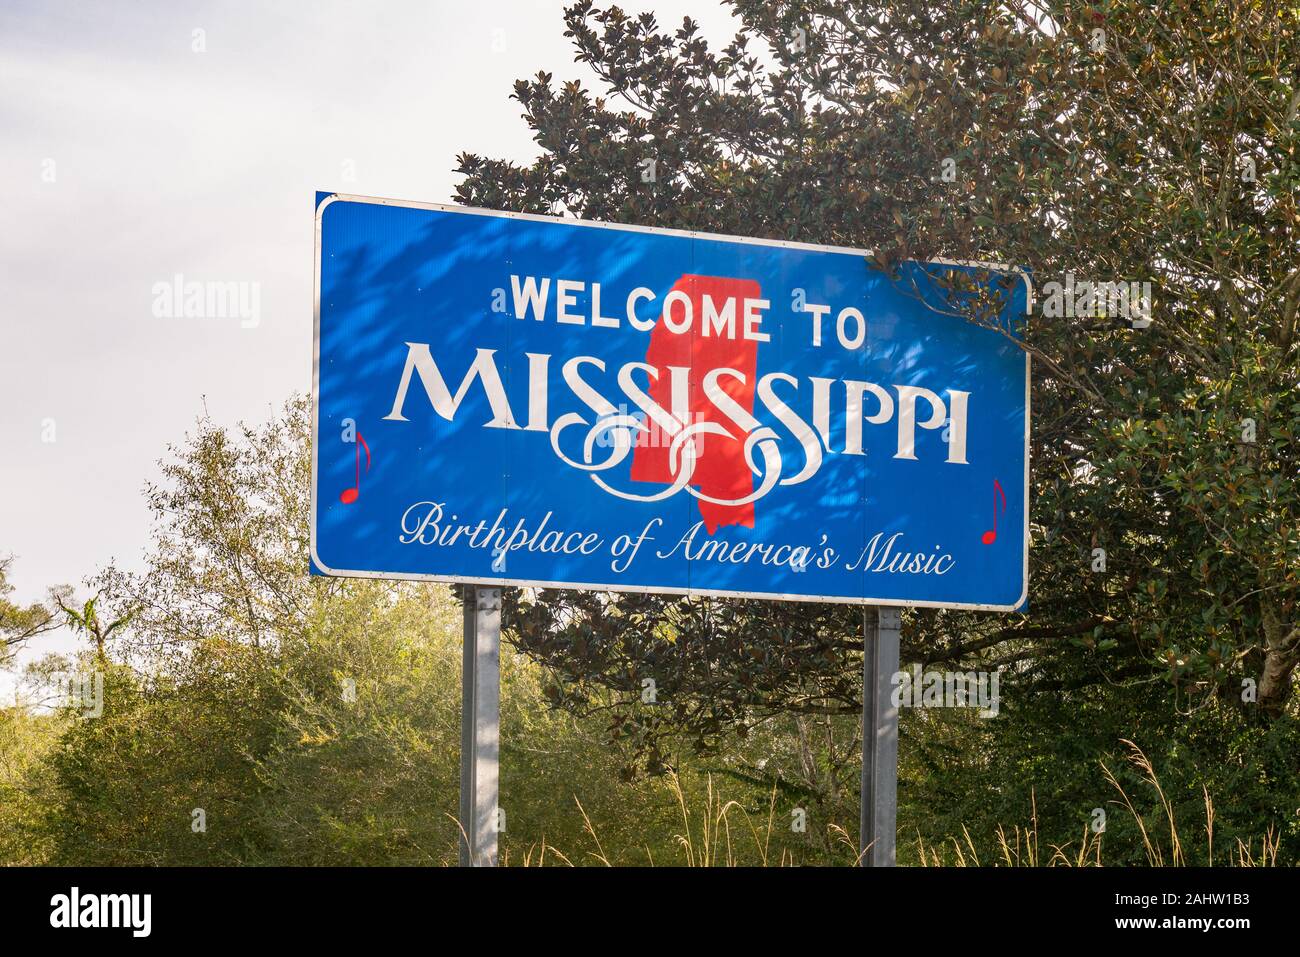 Mississippi, USA - October 7, 2019: Welcome to Mississippi sign along the highway near the state border Stock Photo